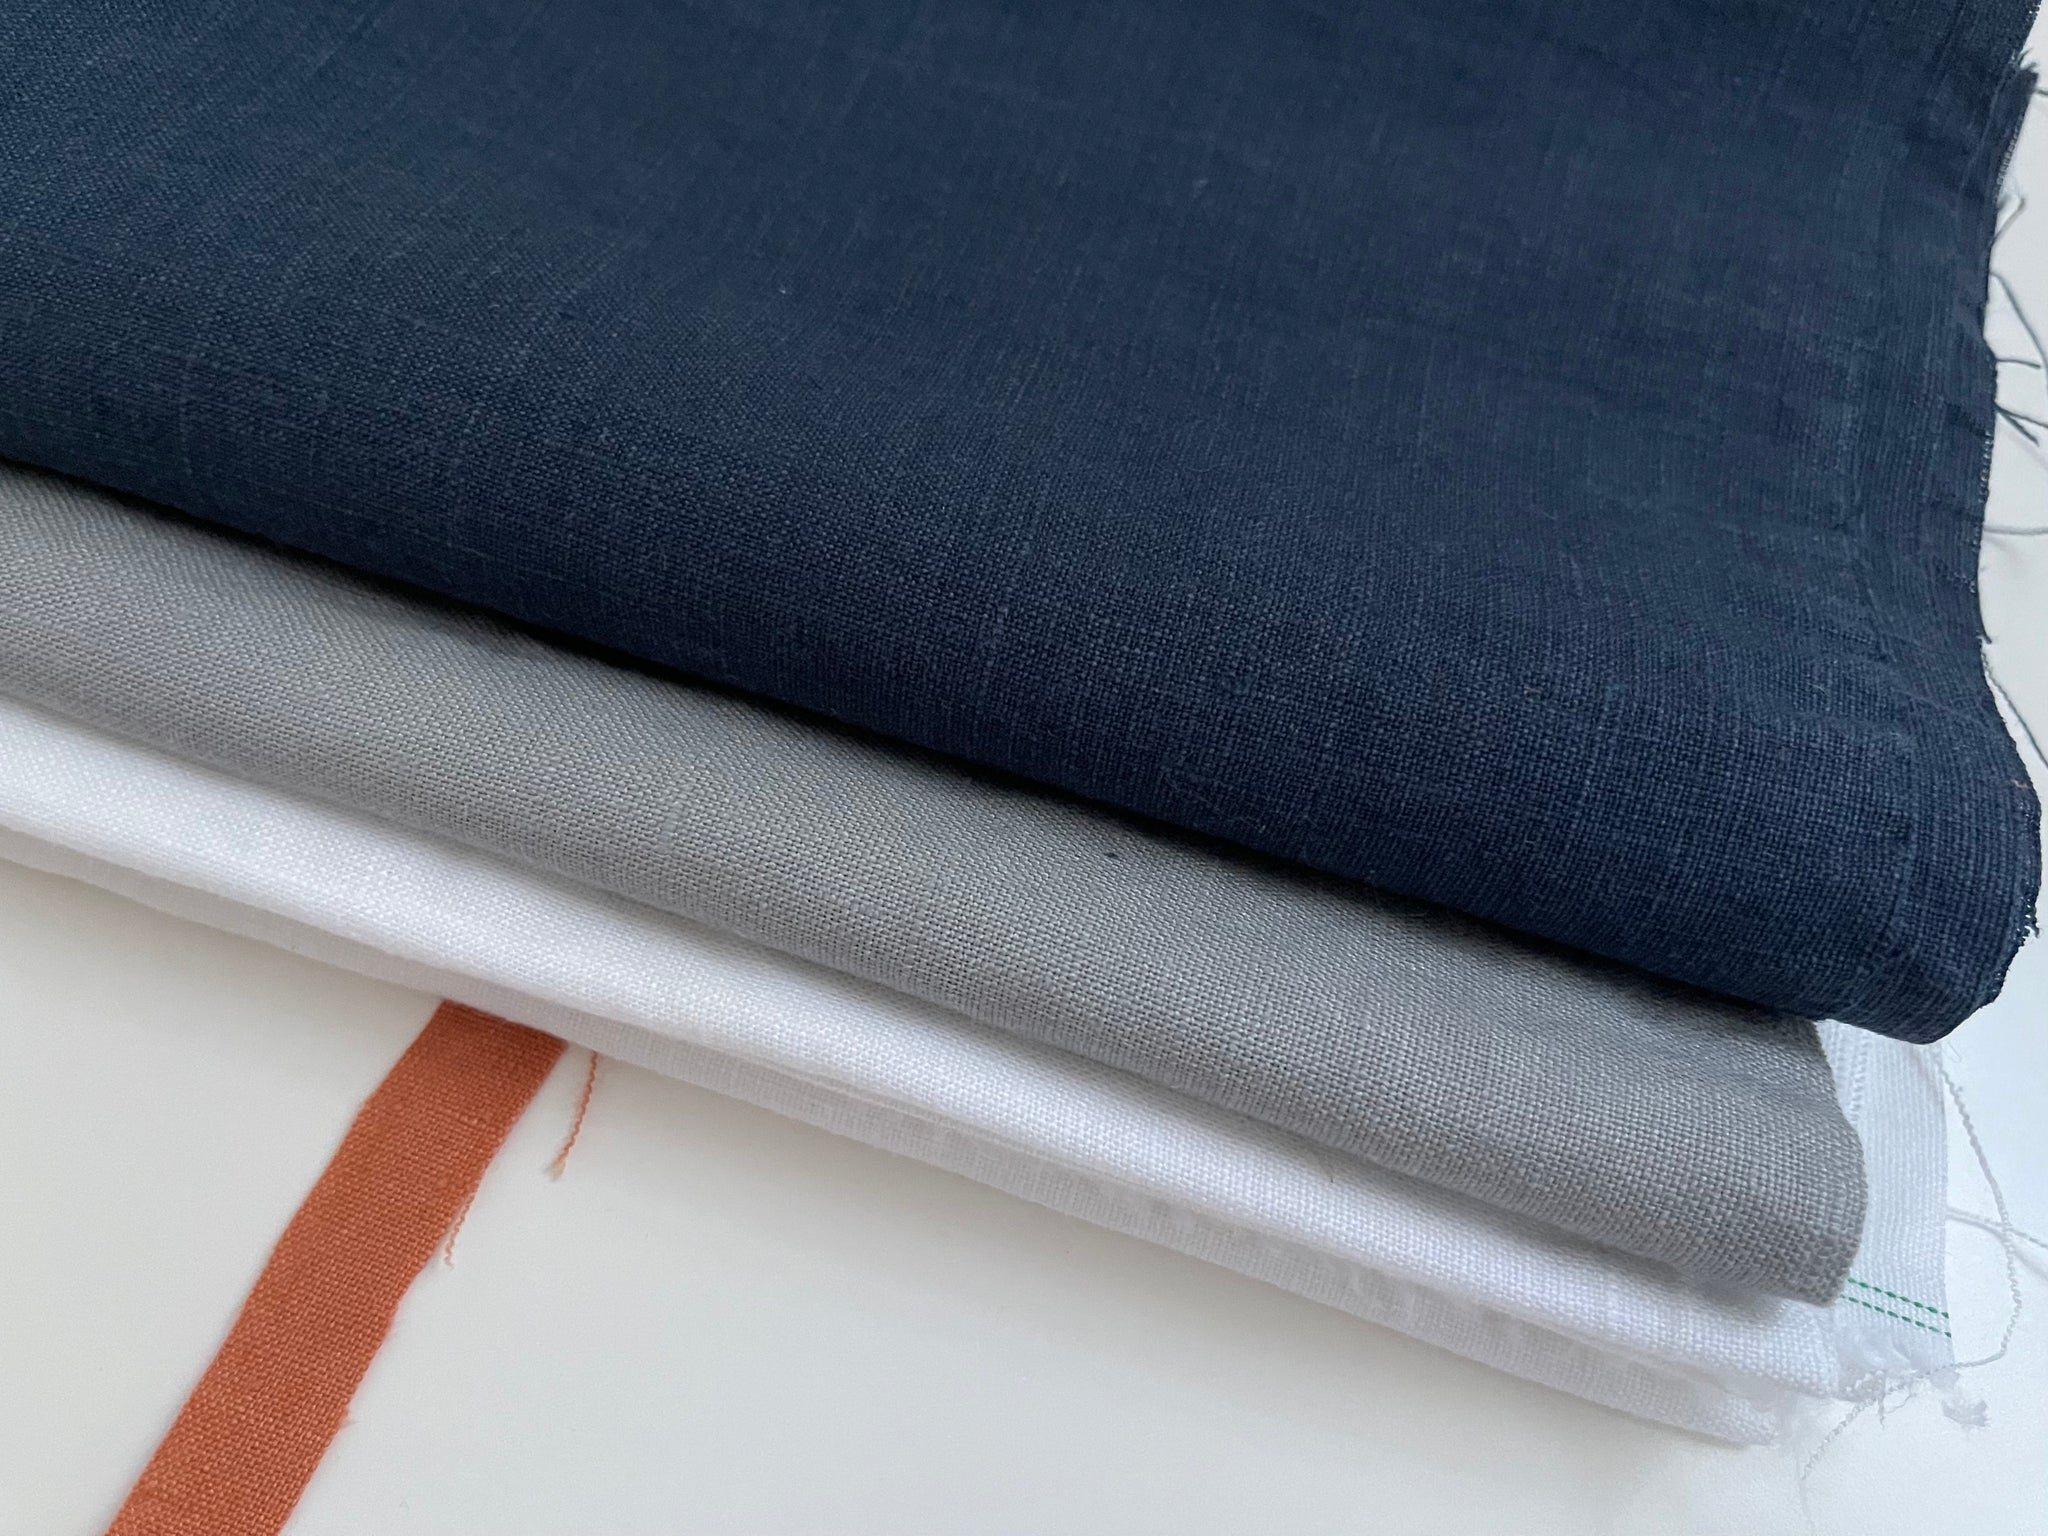 Linen Fabric Remnants - Pure White, Grey, Navy Blue